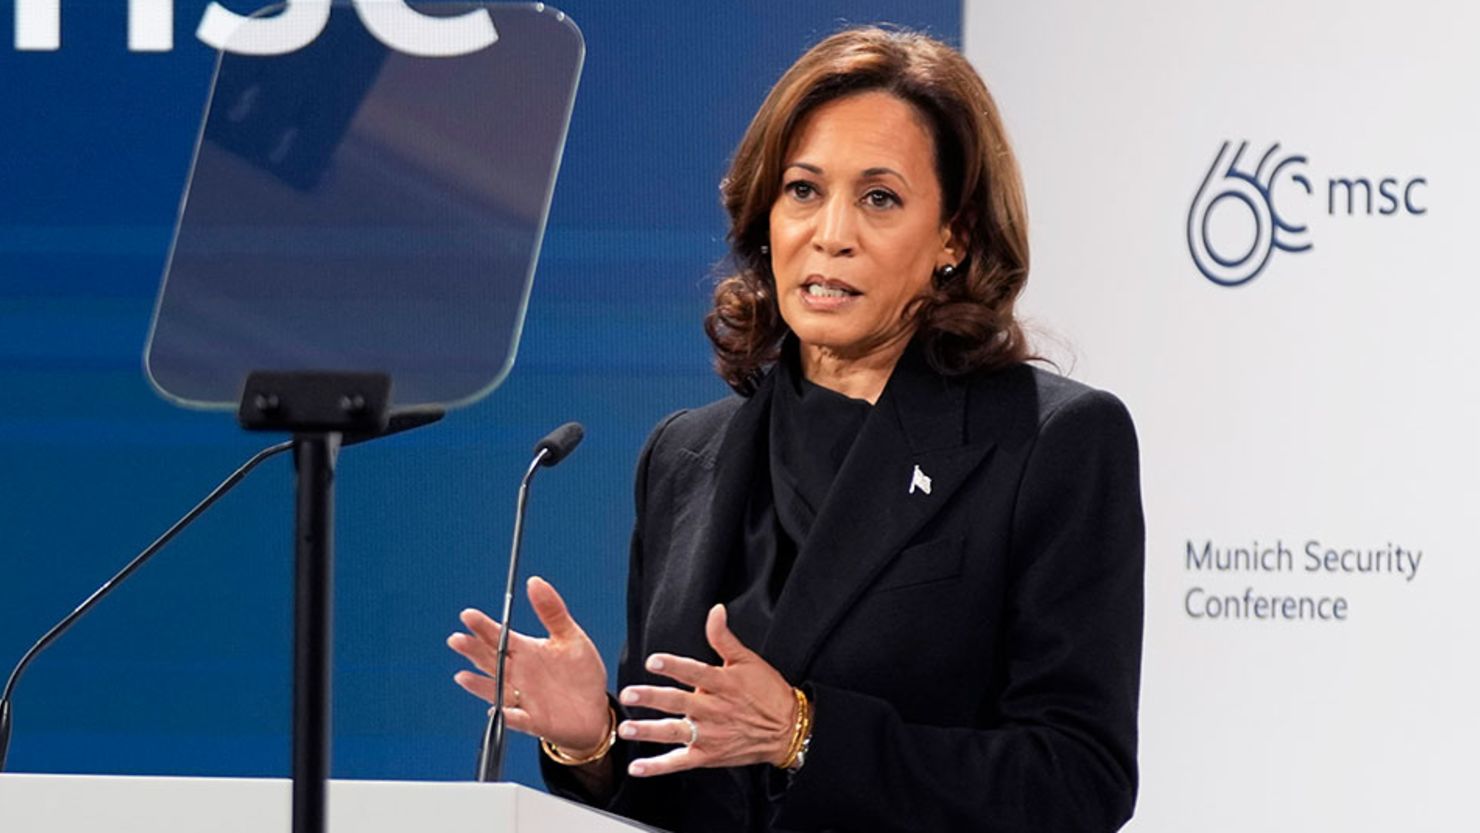 US Vice President Kamala Harris addresses the audience during the Munich Security Conference at the Bayerischer Hof Hotel in Munich, Germany, on Friday.